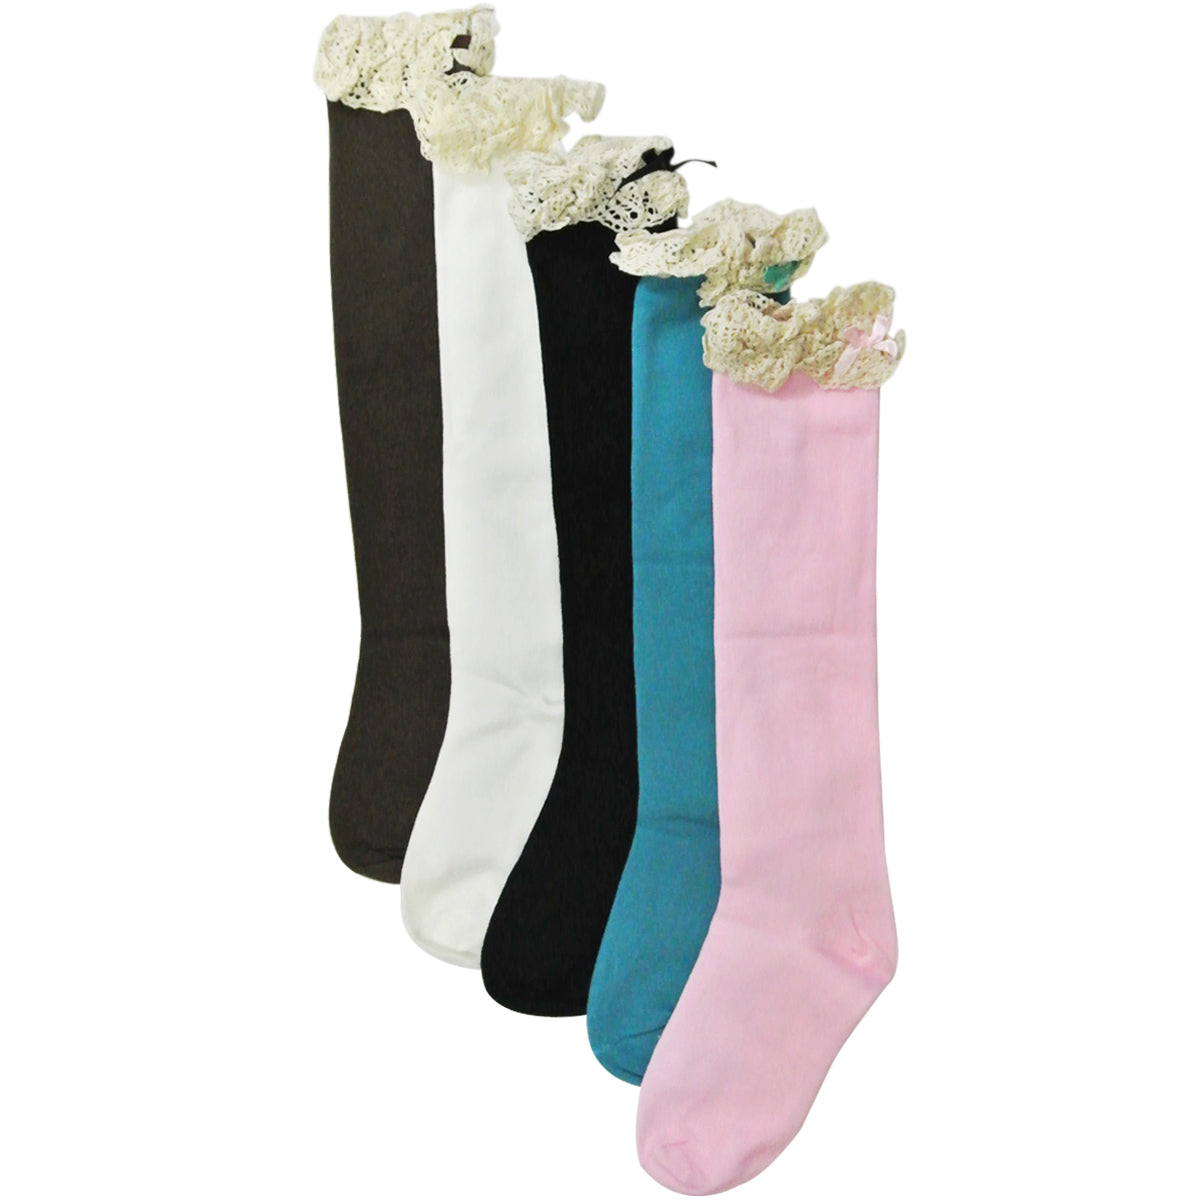 Wrapables Lace Ruffles and Bow Knee High Girl Socks (Set of 5)